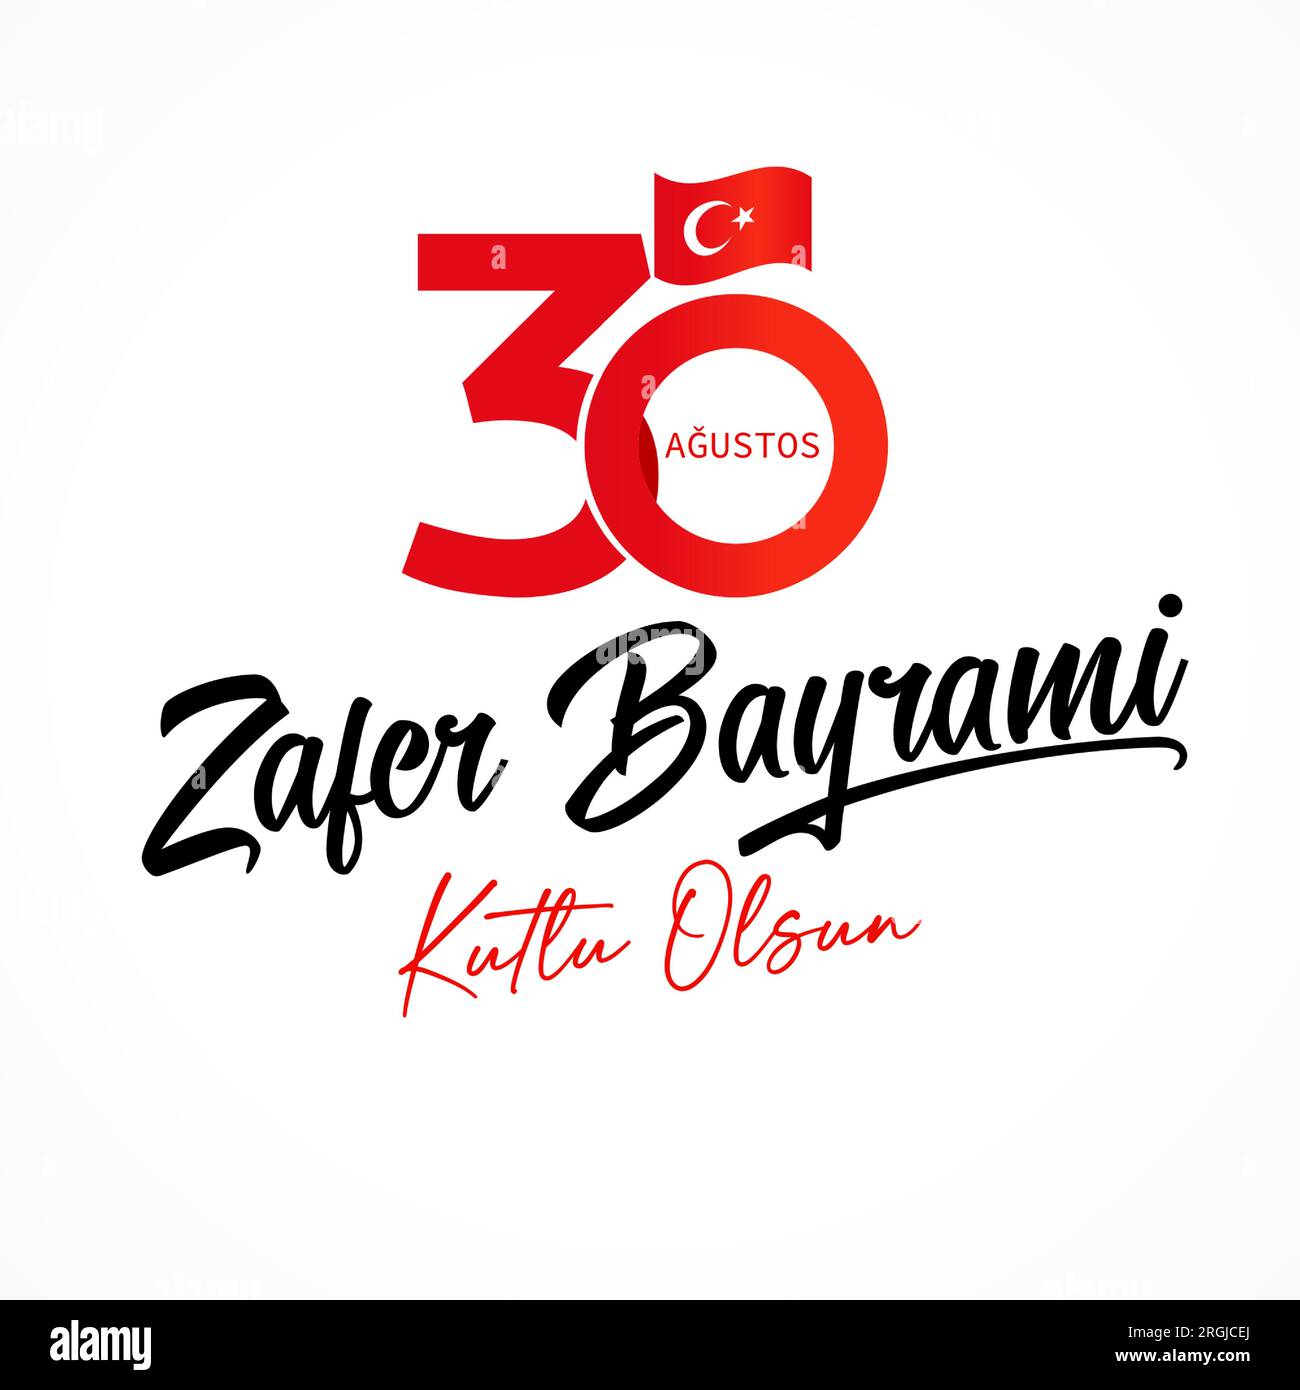 30 Agustos Zafer Bayrami Kutlu Olsun lettering banner. Translation from turkish - August 30, celebration of Victory Day, National Day in Turkey Stock Vector